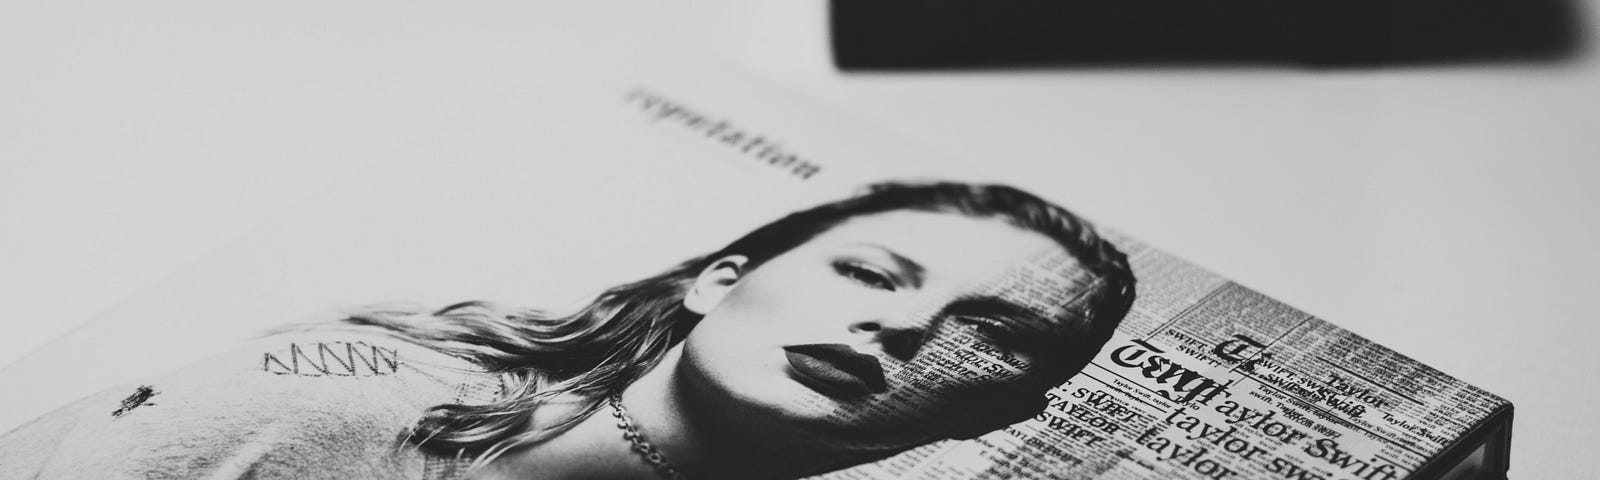 A black and white picture of Taylor Swift on the reputation album cover